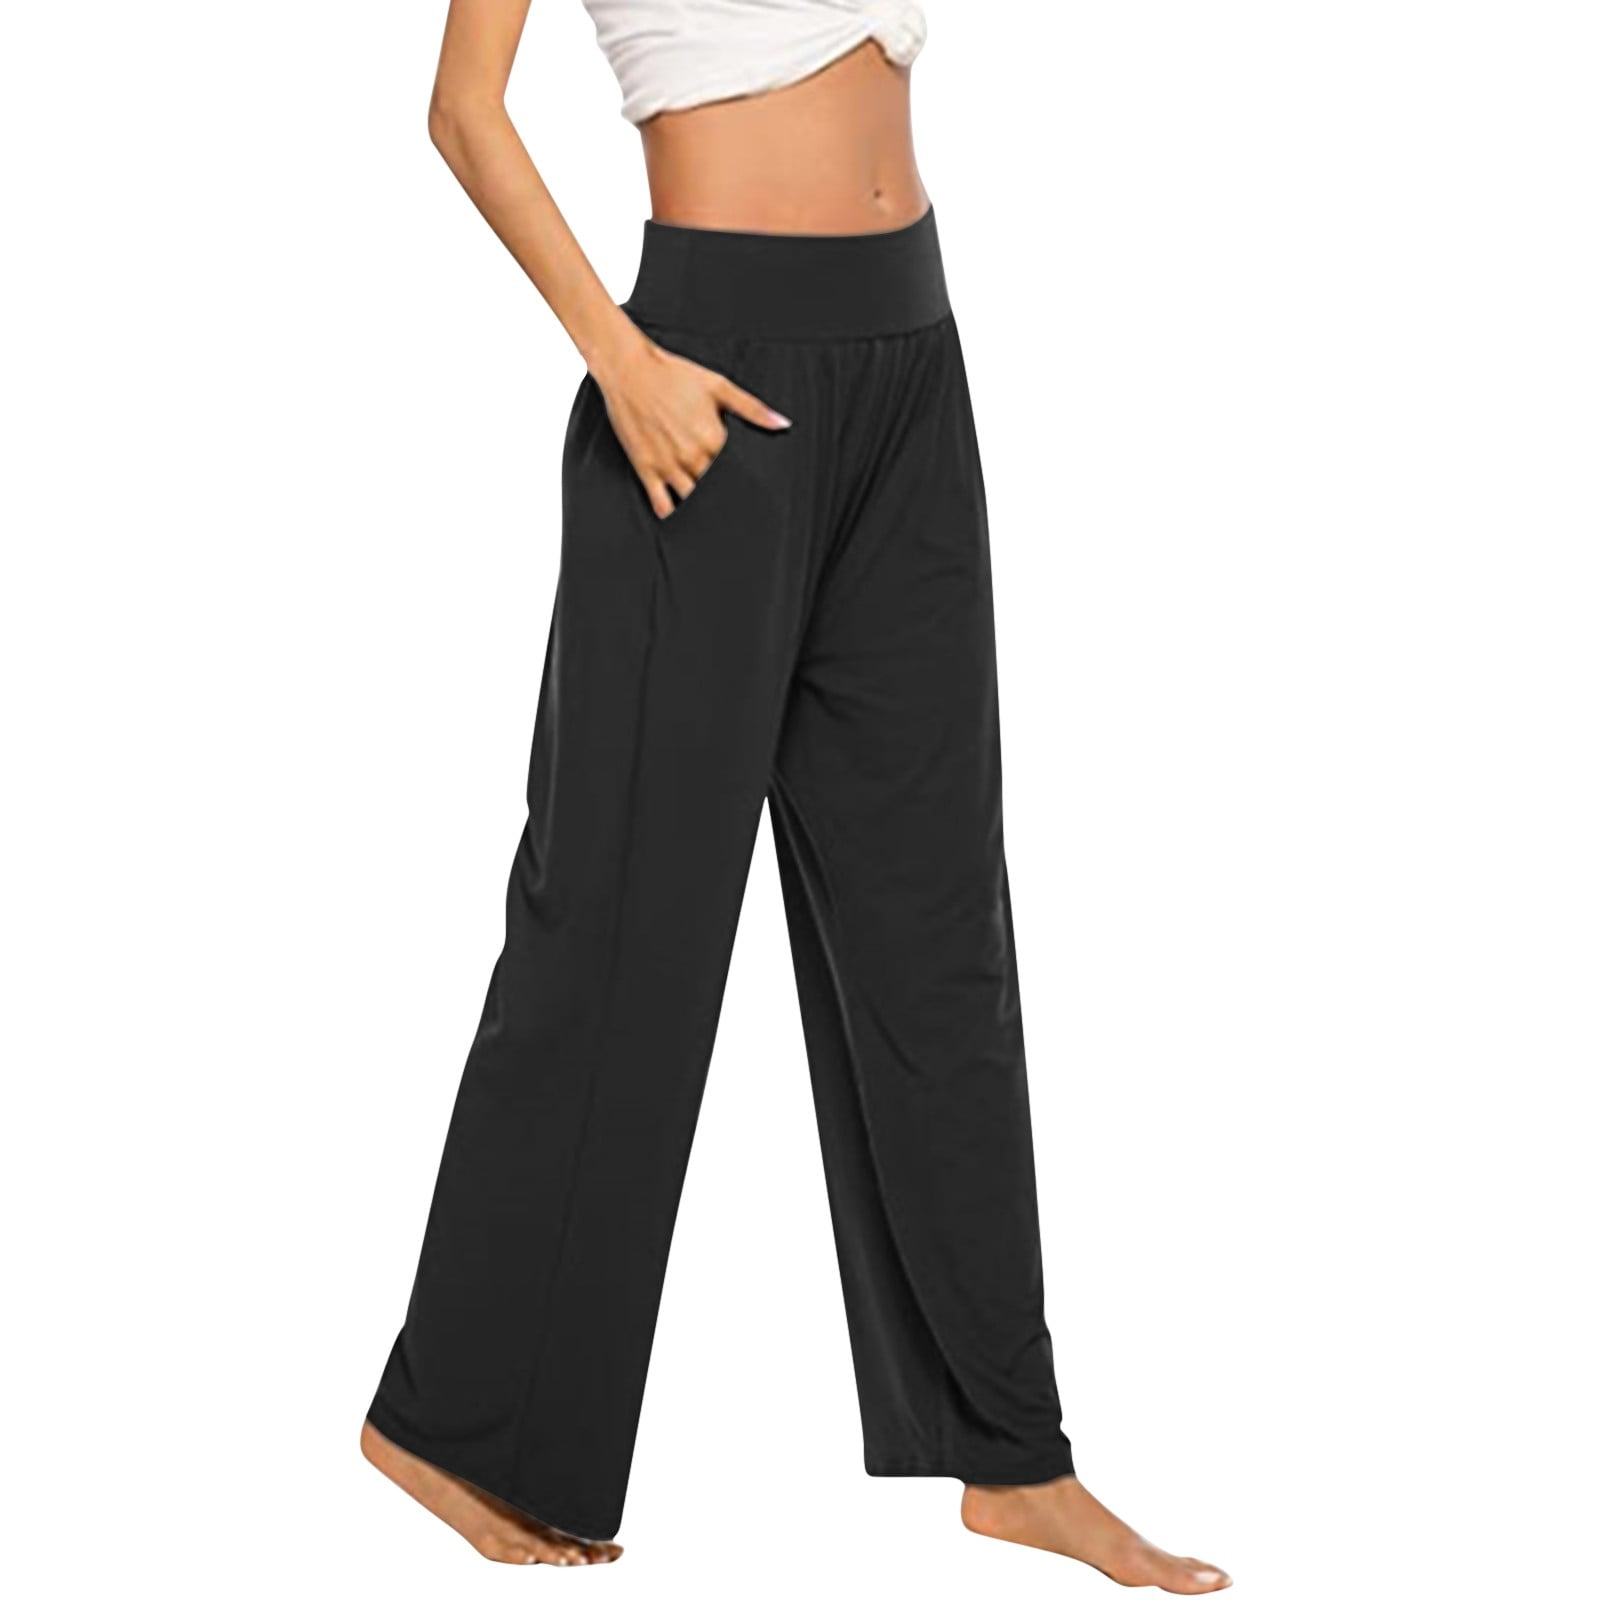 HSMQHJWE Comfortable Work Pants Petite On Dress Pants For Women Business  Casual Womens Yoga Sweatpants Comfy Loose Casual Wide Leg Lounge Joggers  Pants With Pockets Trousers For Women 